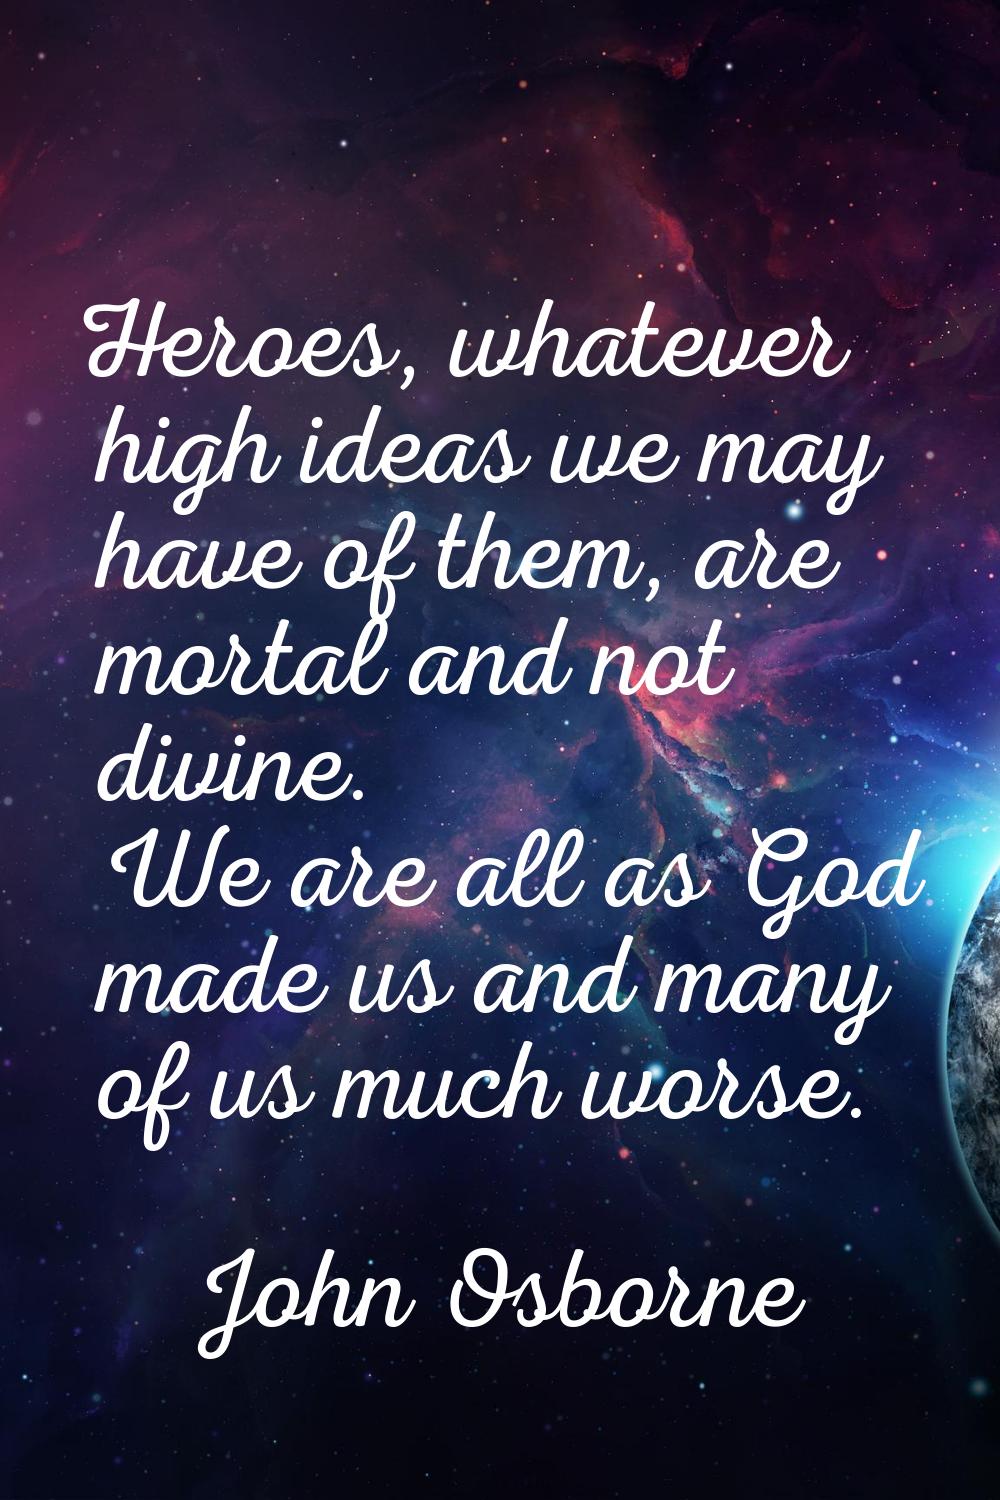 Heroes, whatever high ideas we may have of them, are mortal and not divine. We are all as God made 